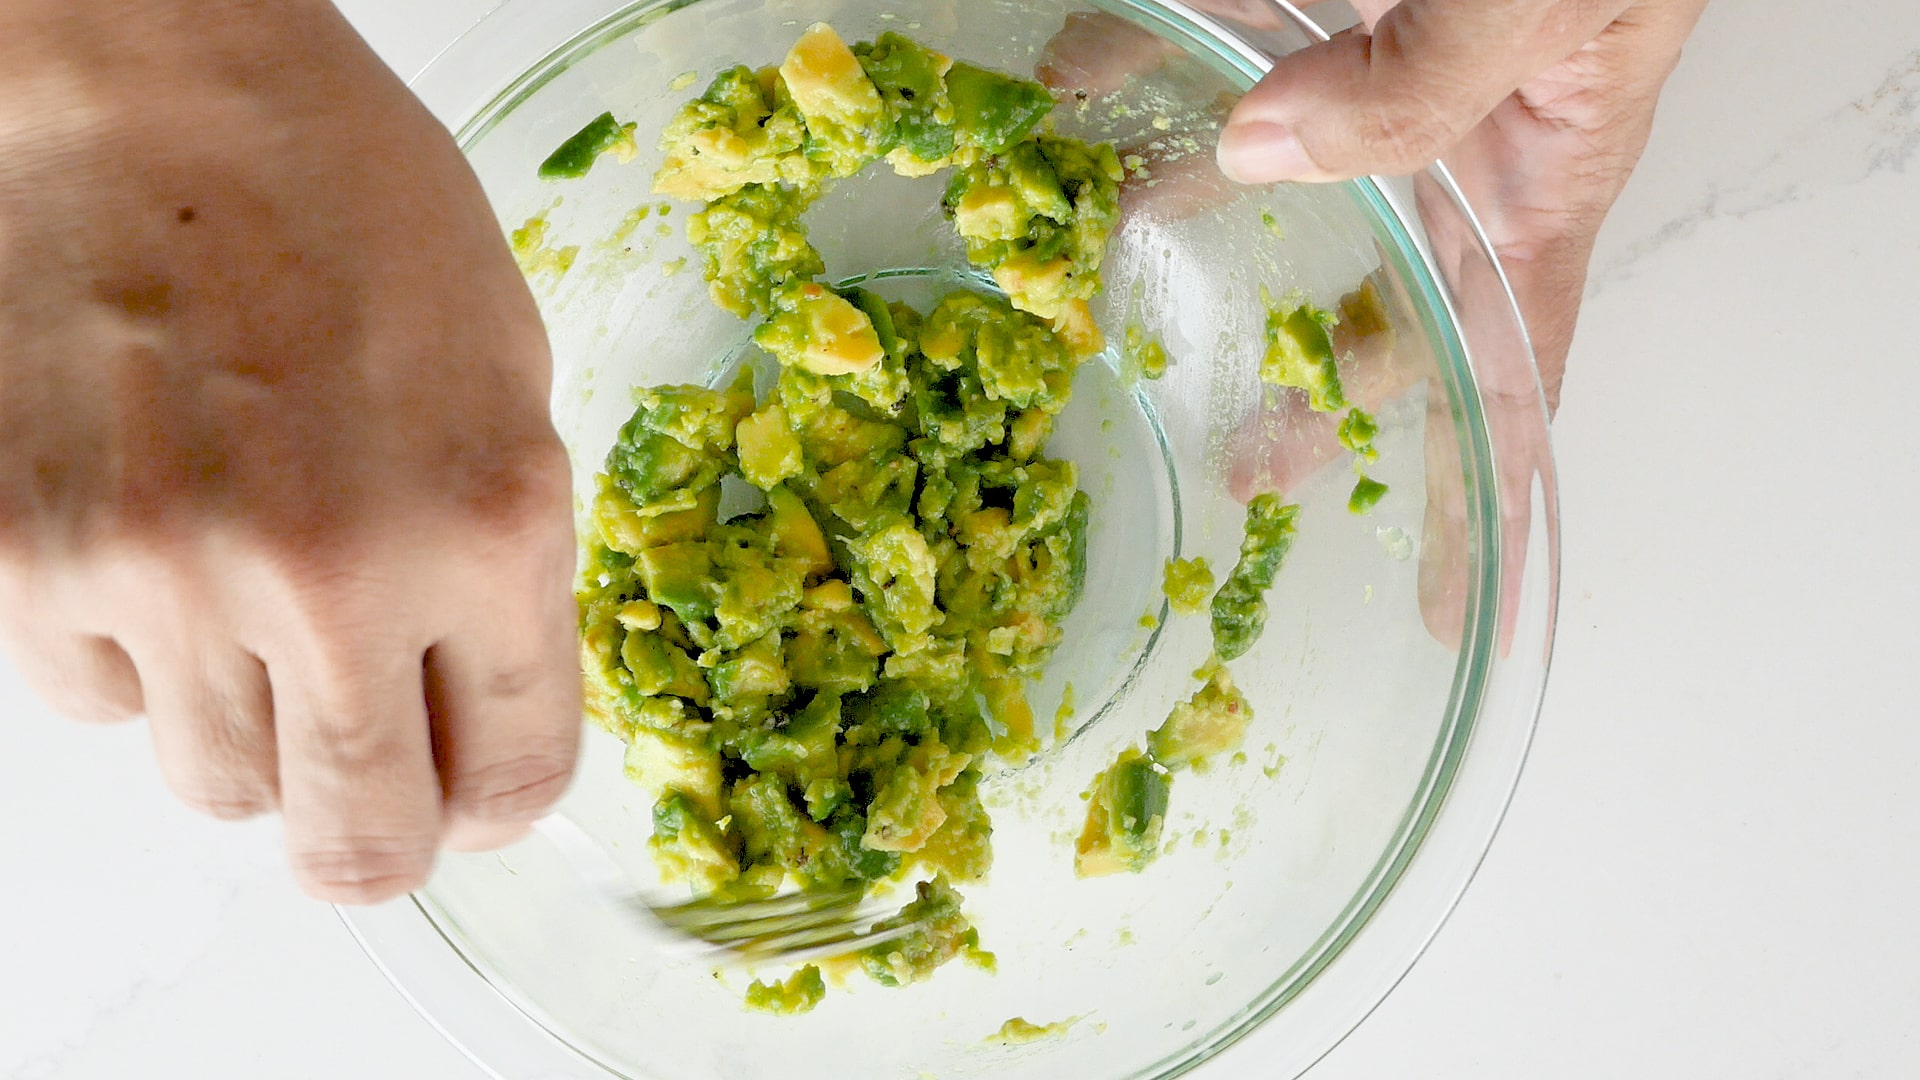 Making the avocado layer